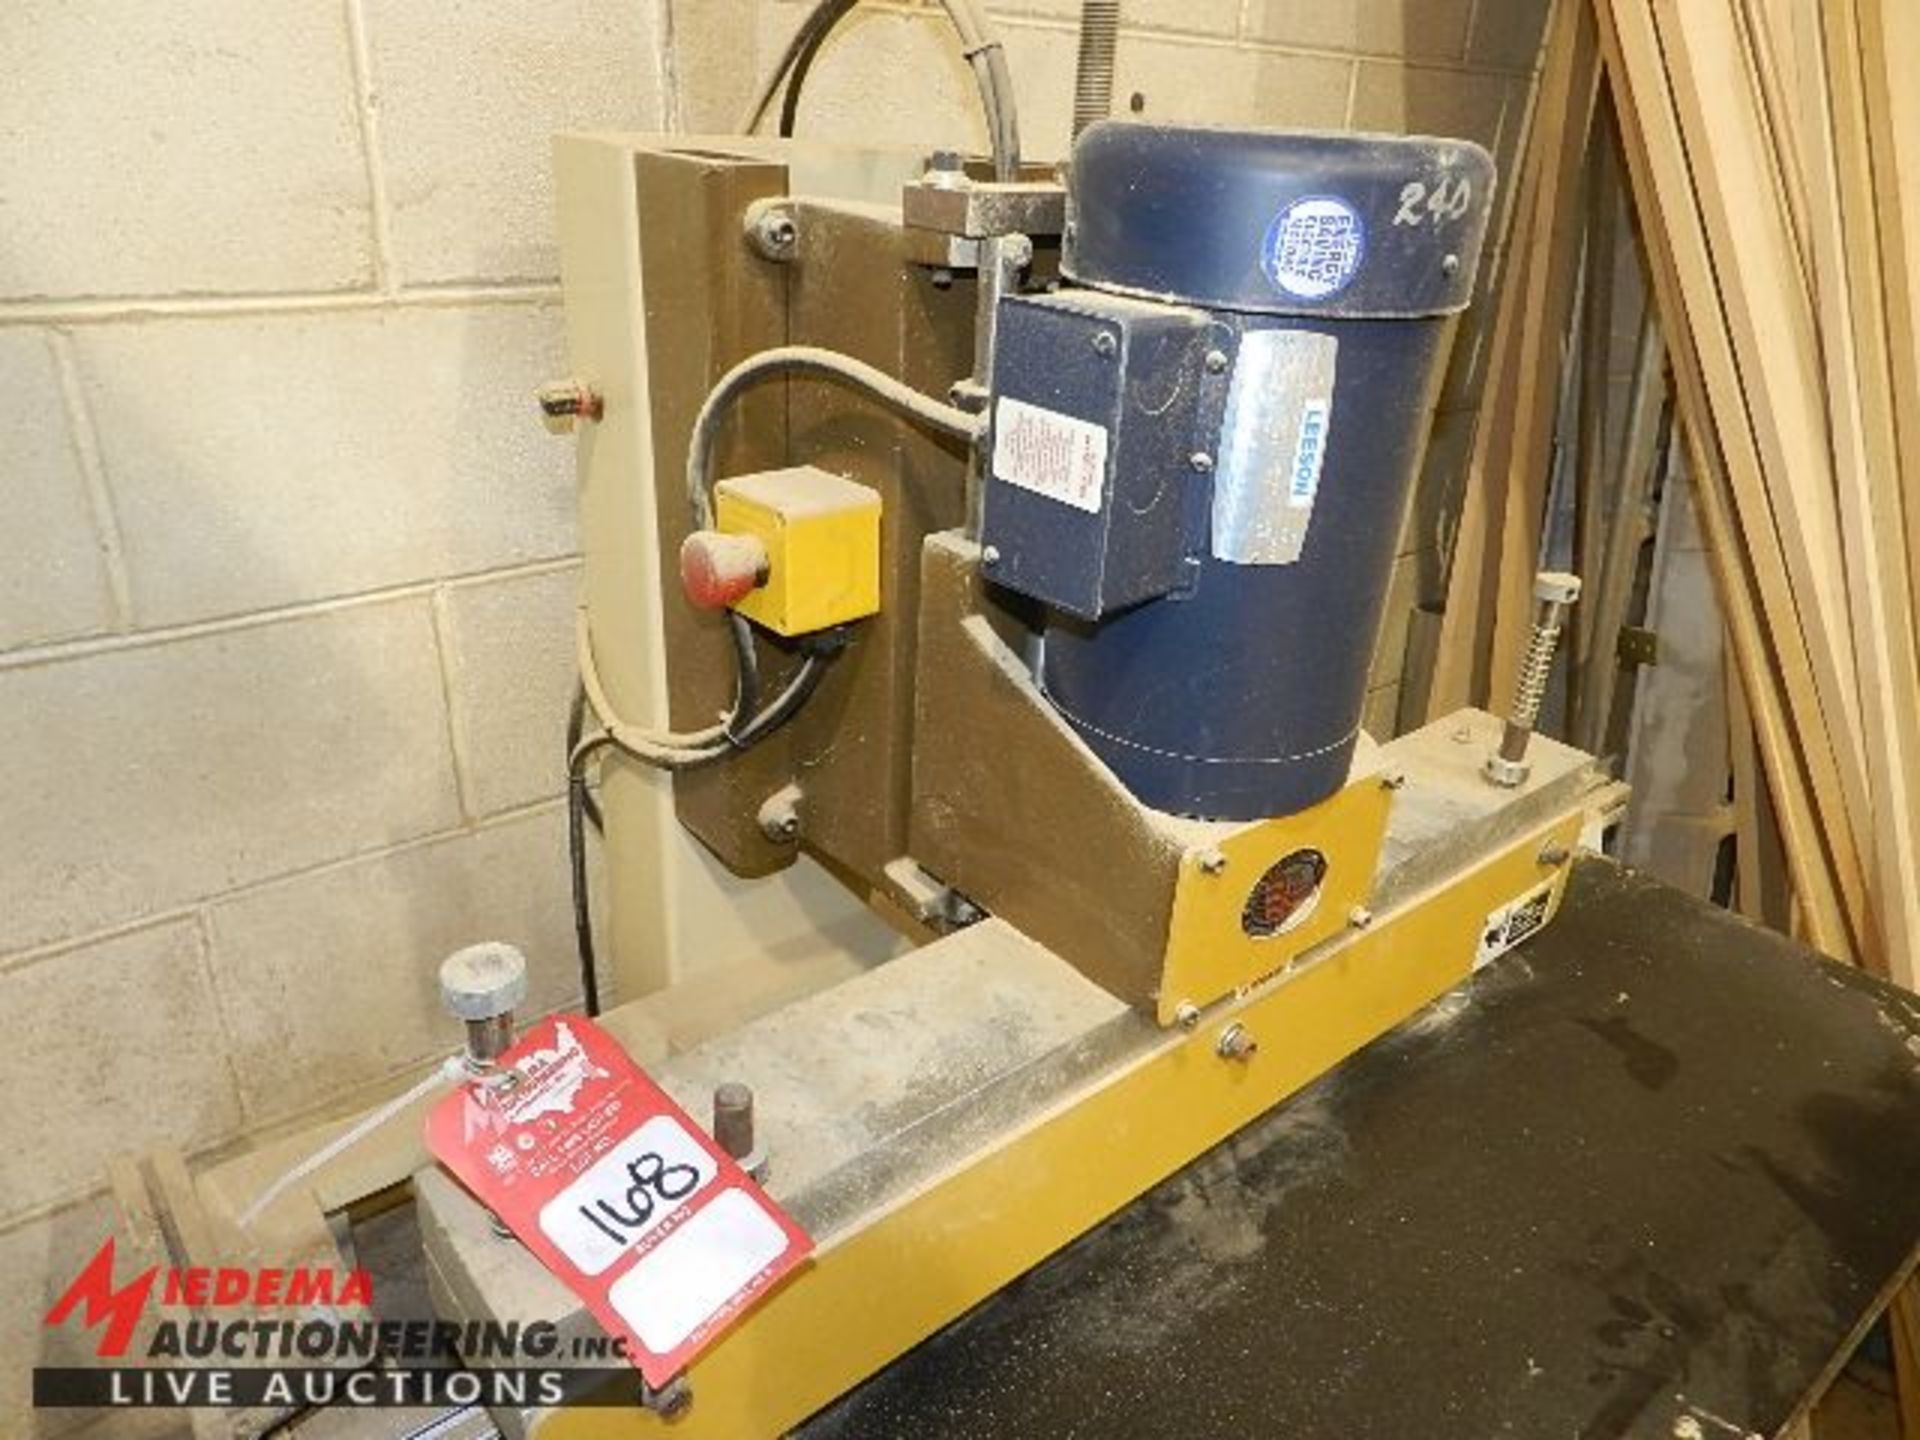 RITTER R19F3 BORING MACHINE ROW LINE DRILL, 32" DRILL HEAD, 230 VOLT, 3 PHASE, S/N 1522 - Image 3 of 4